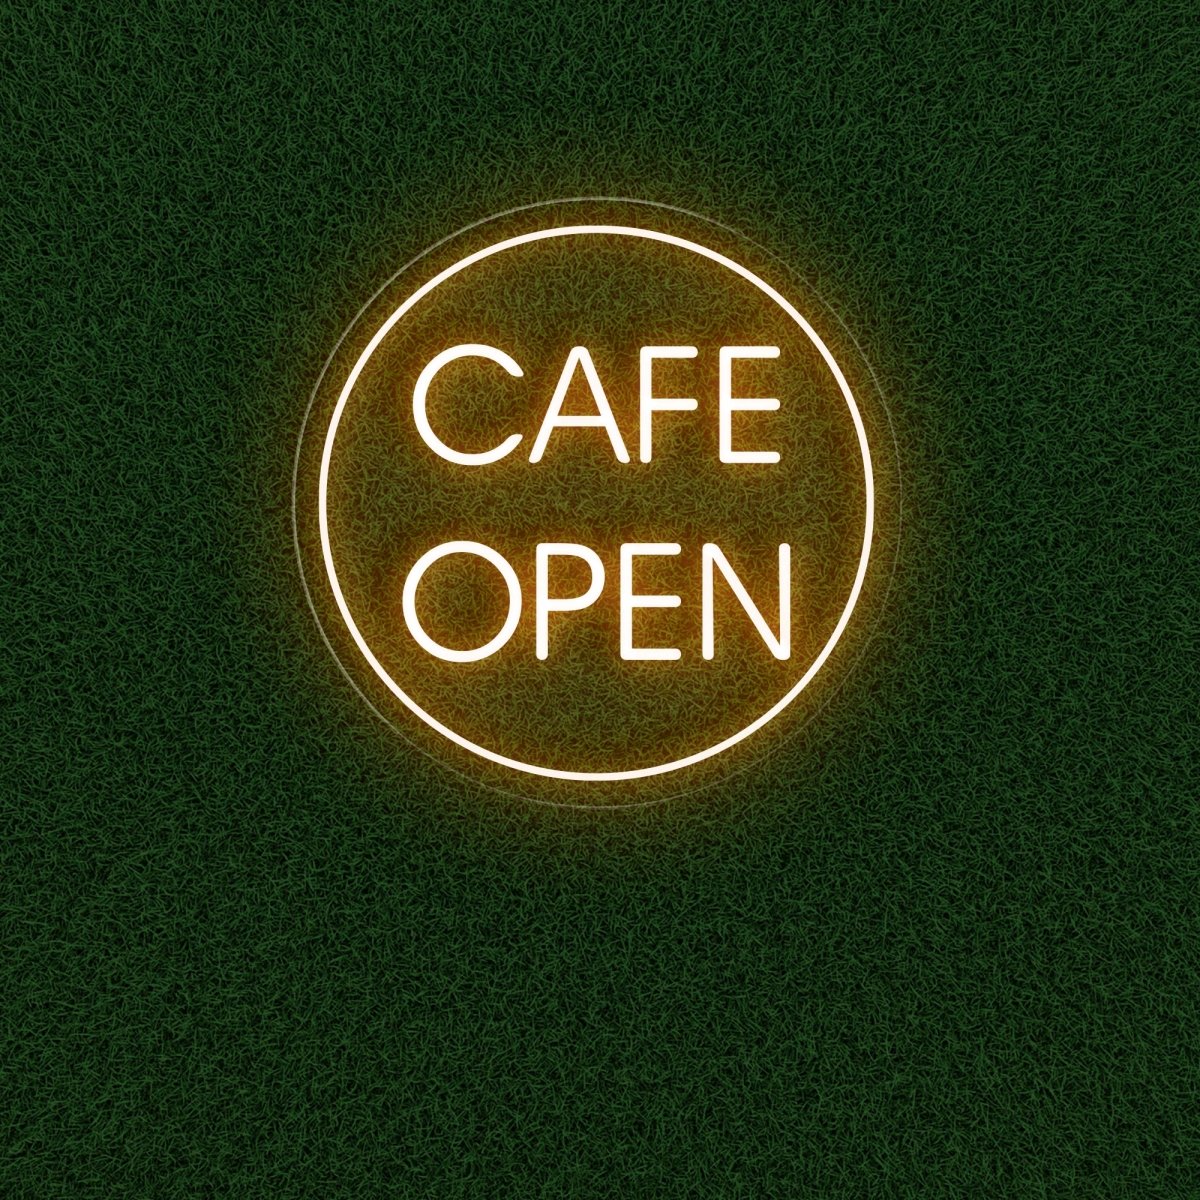 Cafe Open Neon Sign | LED Lighted Window Display for Cafes - NEONXPERT